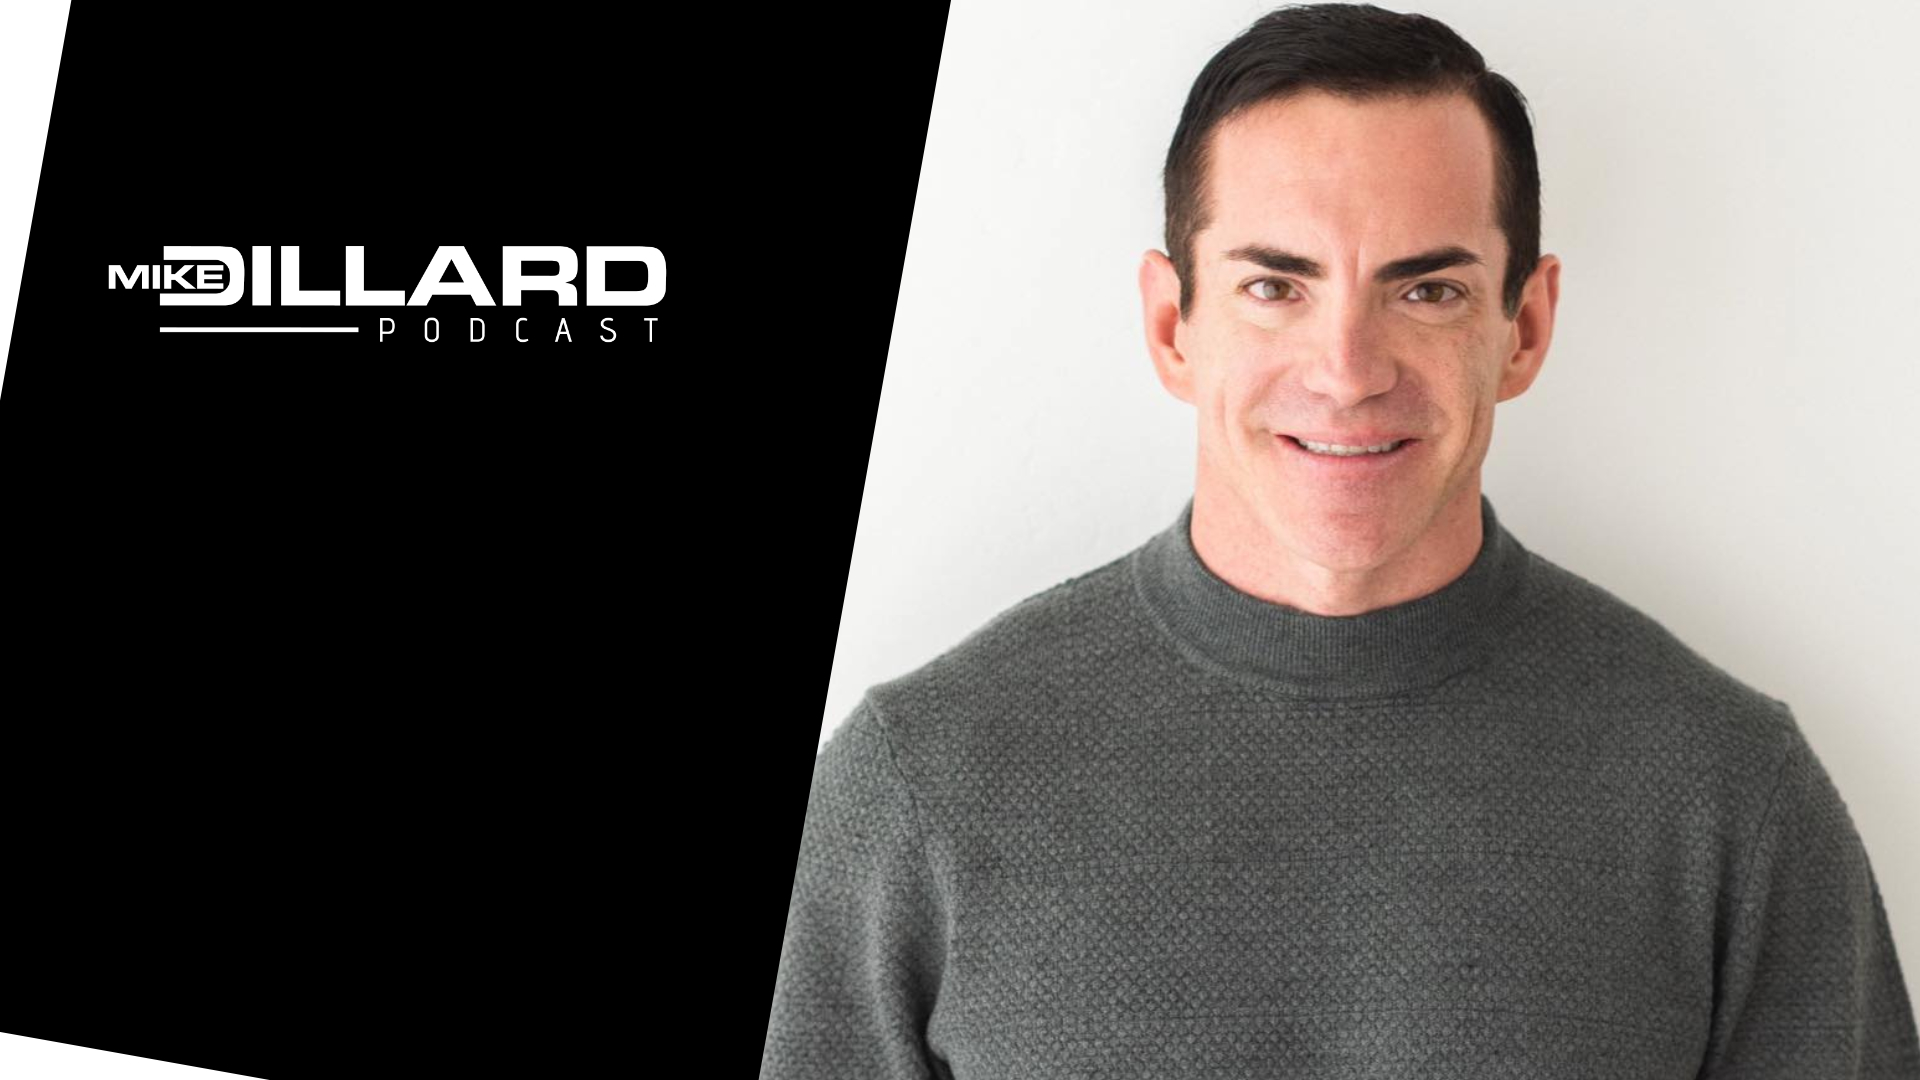 The $2 Million Per Month Marketing Strategy With Jeff Lerner - Mike Dillard